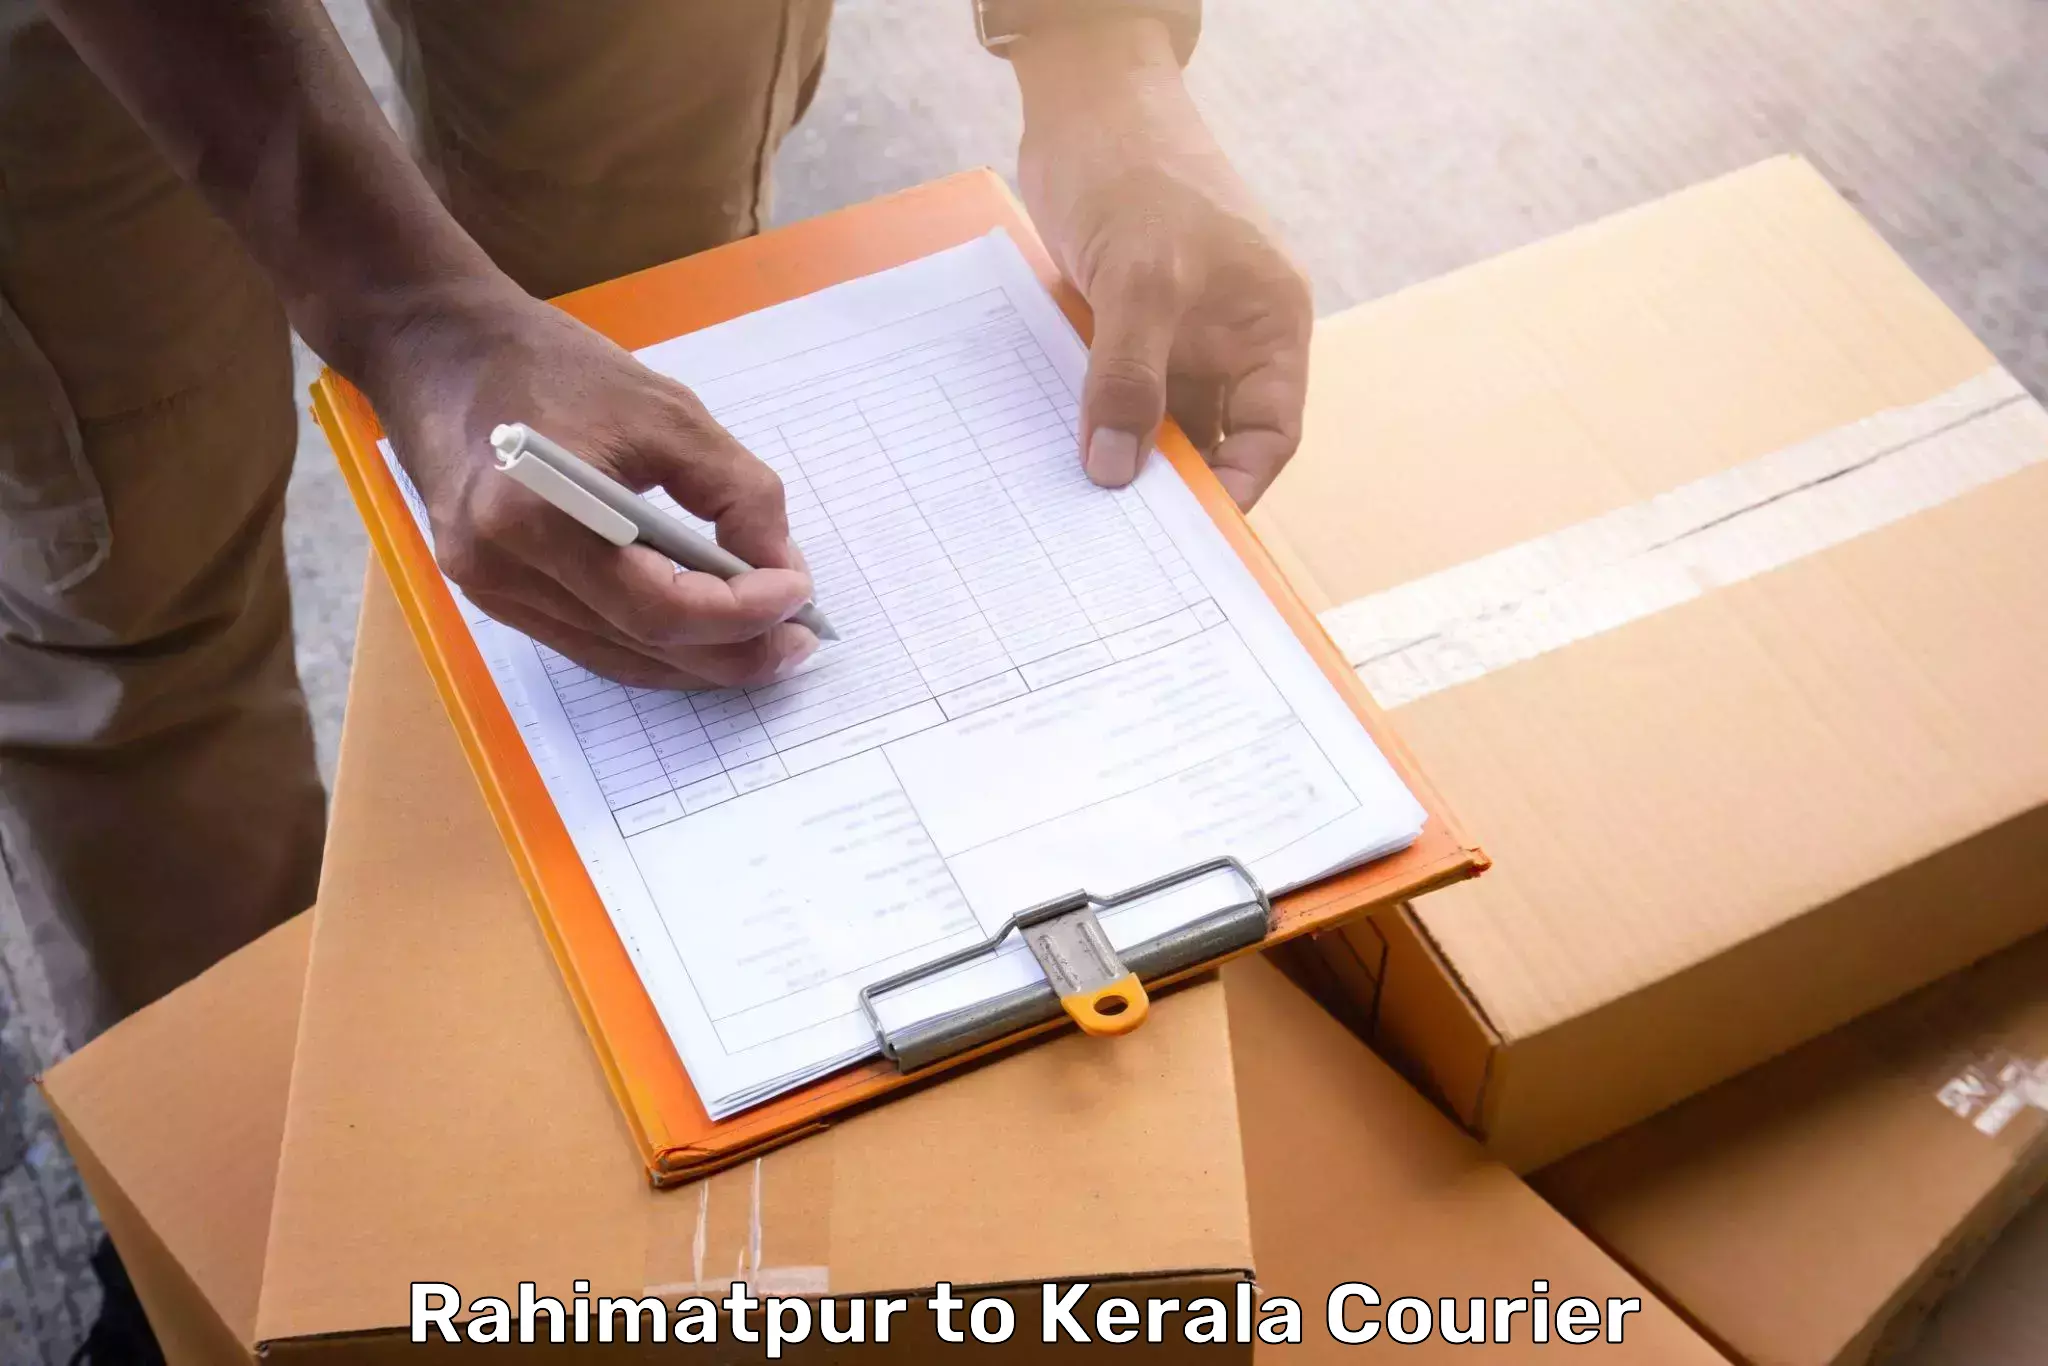 Luggage transport consulting in Rahimatpur to Kozhikode